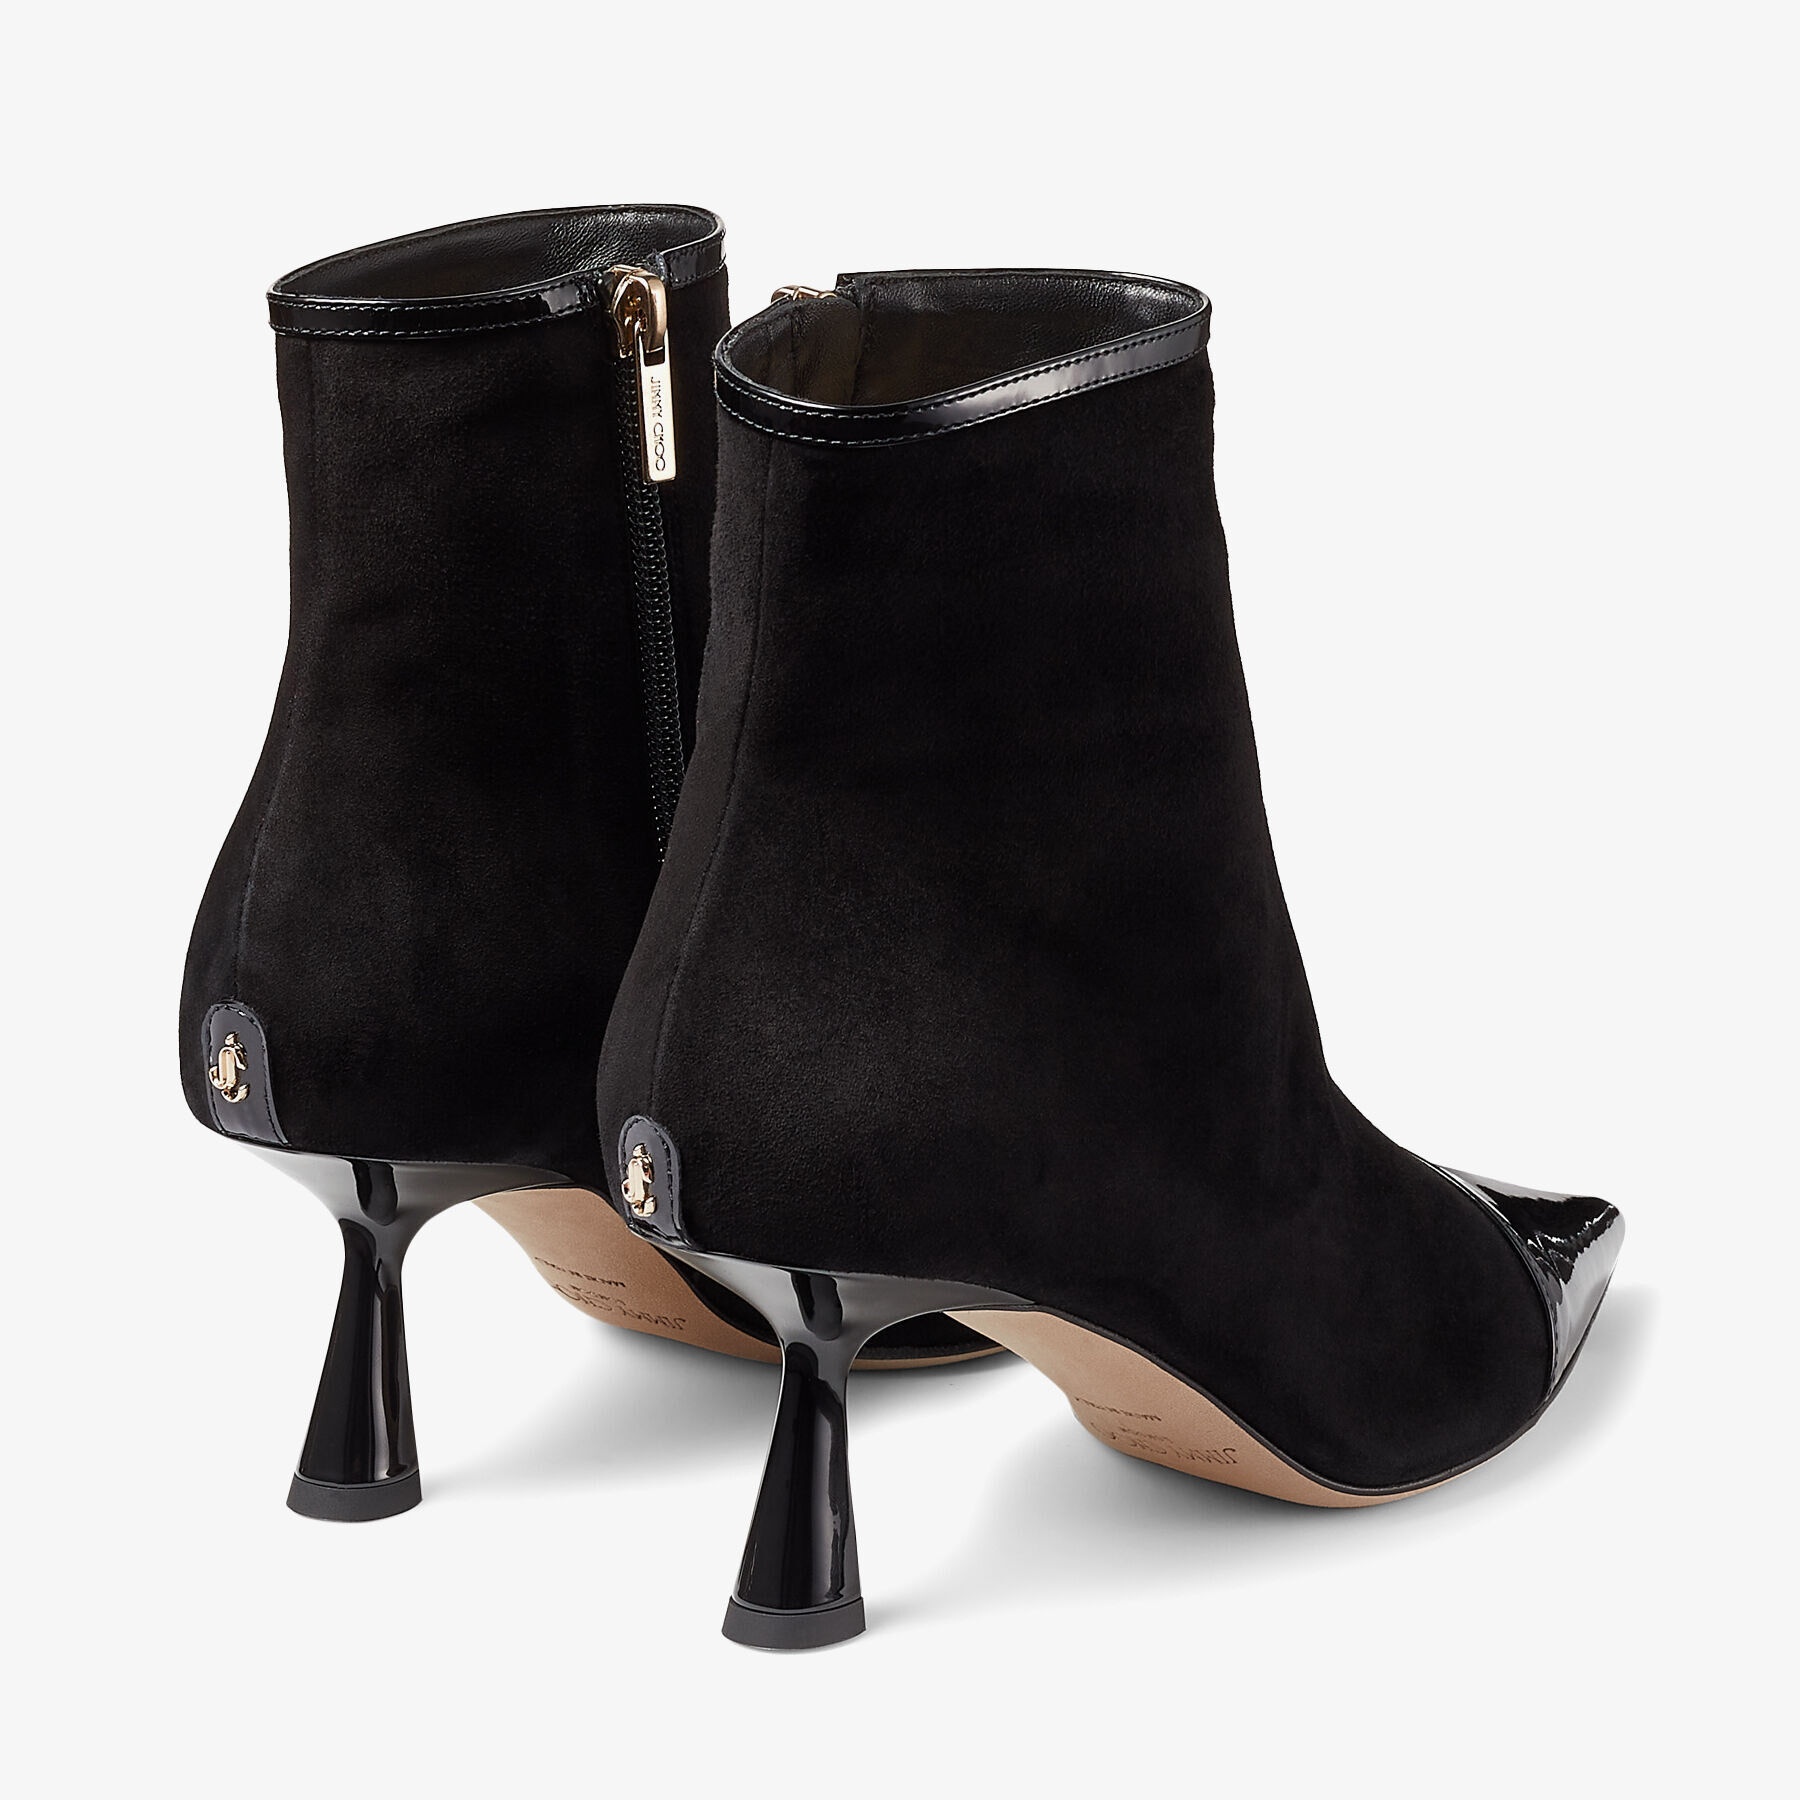 Kix/z 65
Black Patent and Suede Ankle Boots - 5